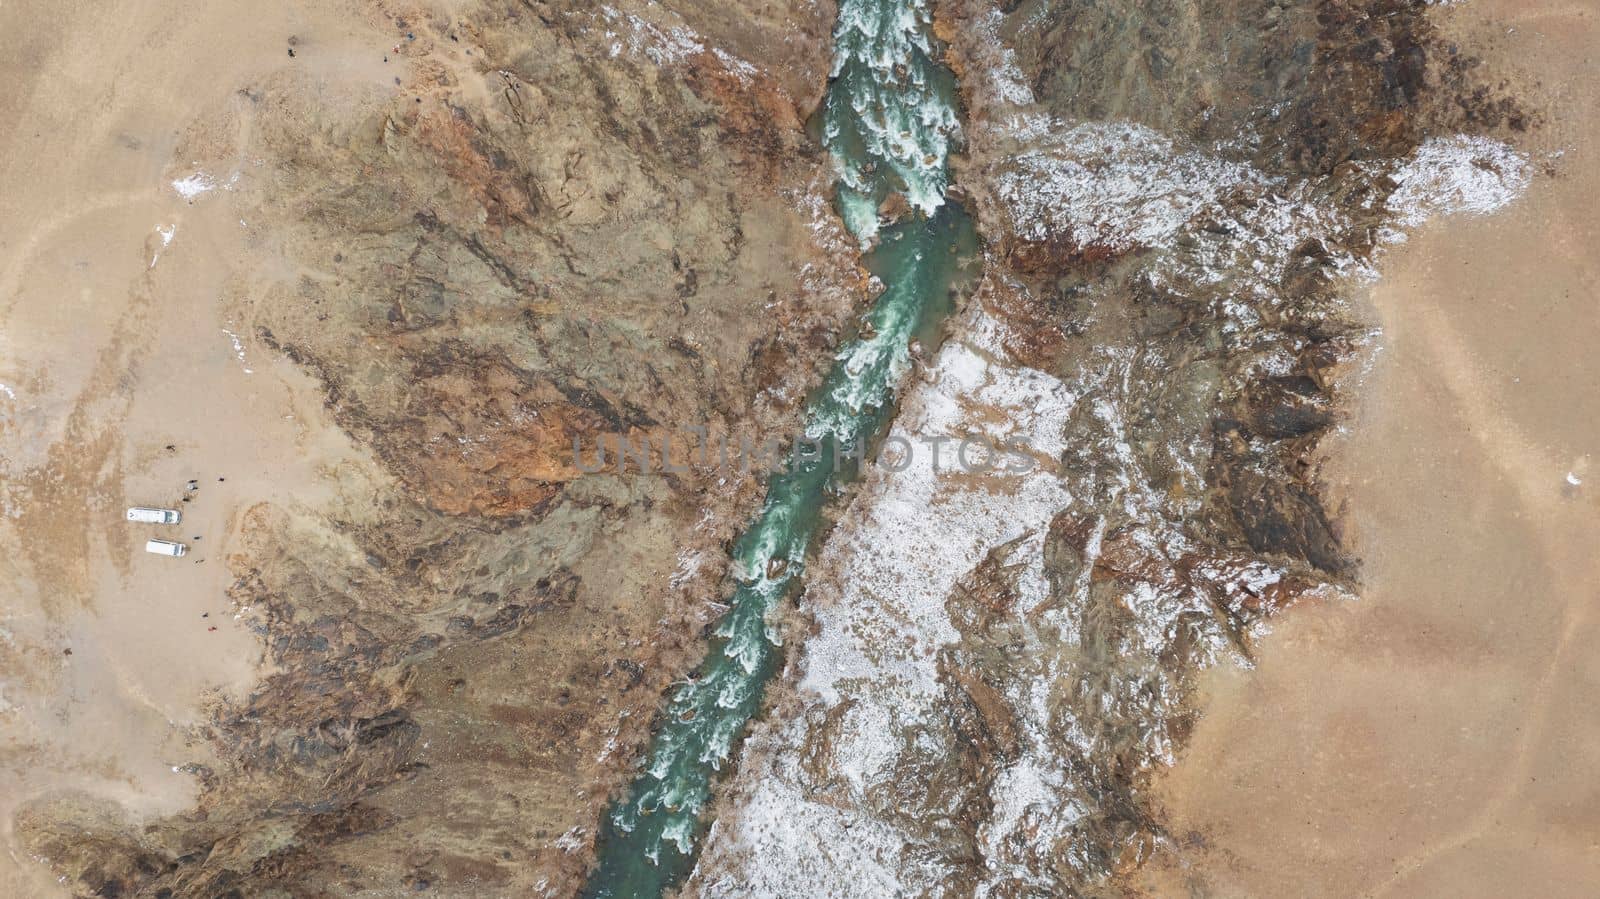 The Grand Canyon in the steppe with the emerald river. A crack in the ground with black stones, the green color of the river. Bushes grow in places. There are tourists and buses on edge. Kazakhstan